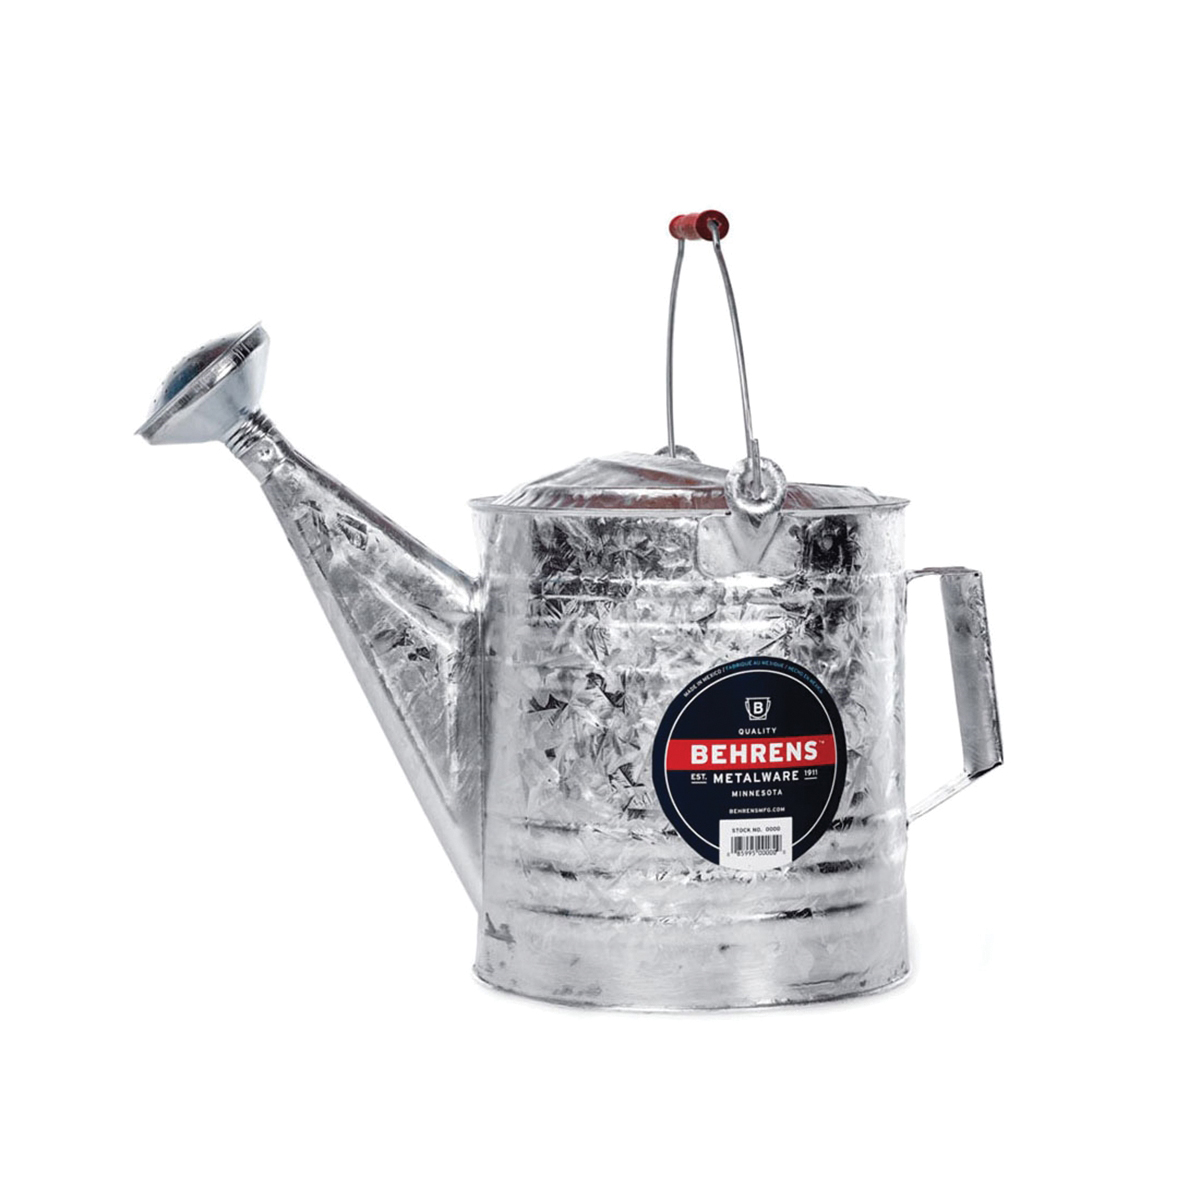 210RH Watering Can with Red Wooden Handle, 2.5 gal Can, Steel, Gray, Galvanized